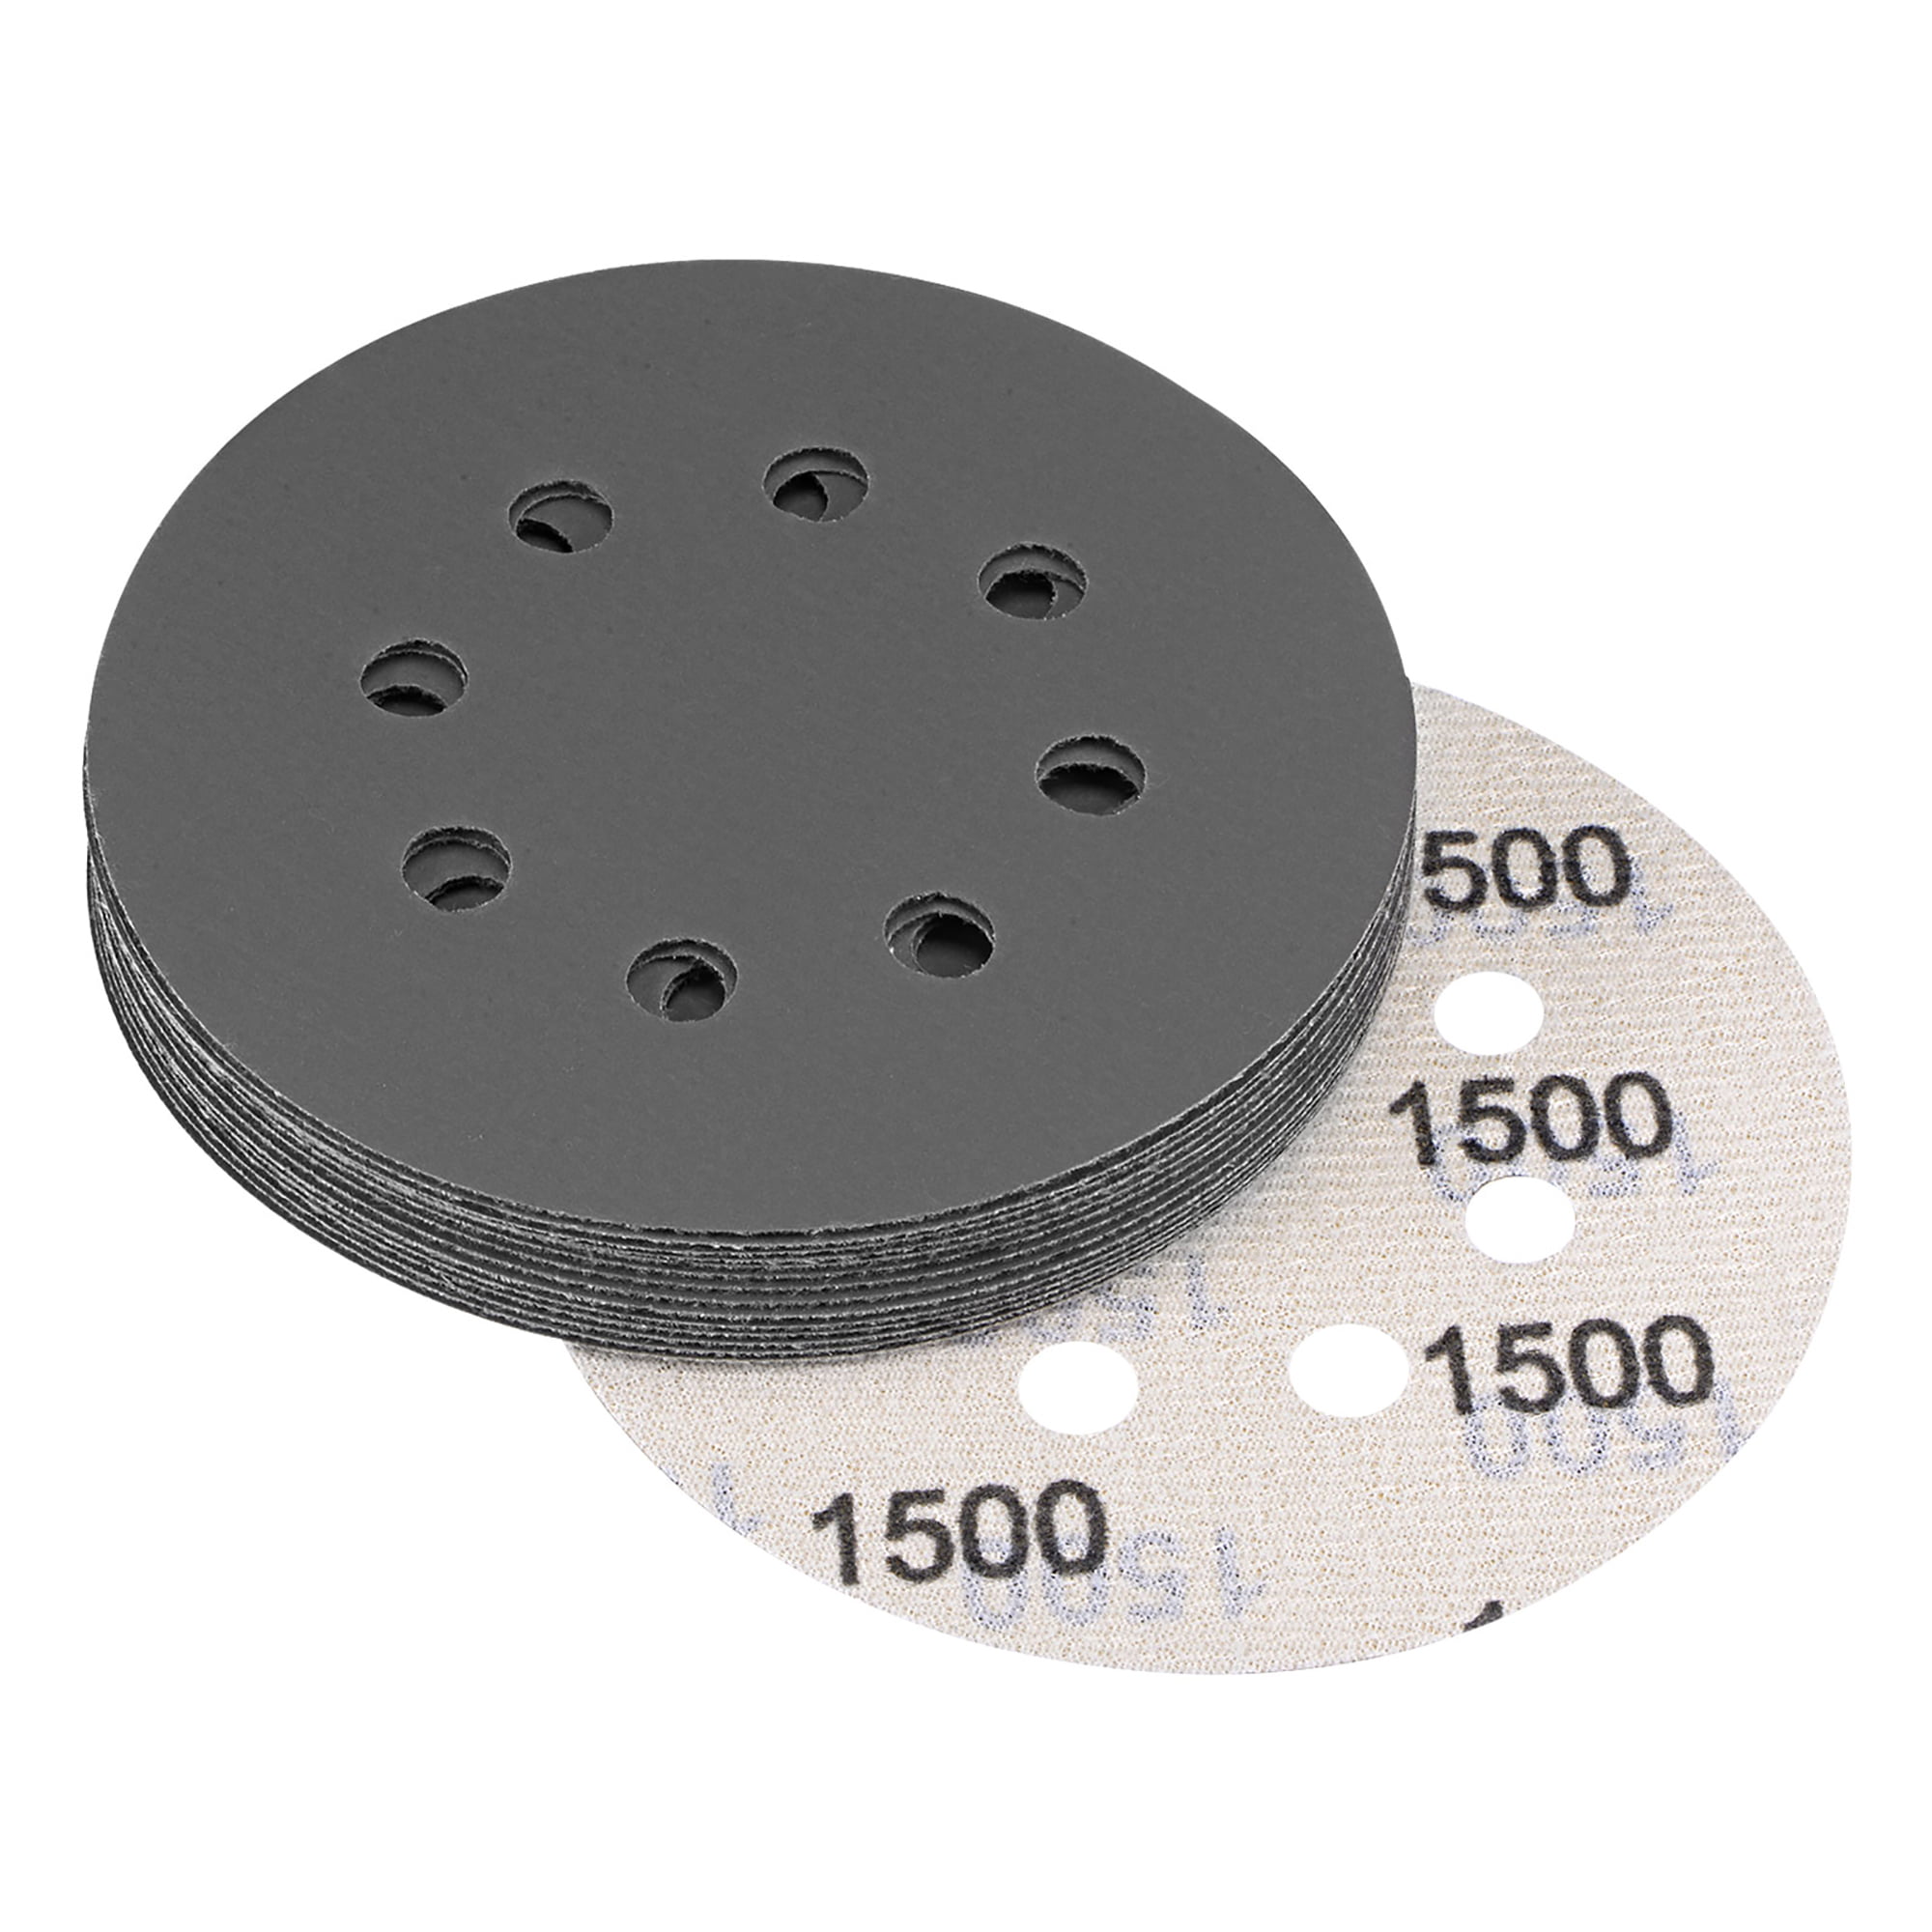 uxcell 5 Inch Wet Dry Sanding Discs 80 Grit Hook and Loop Sanding Disc Silicon Carbide Sandpaper 10pcs